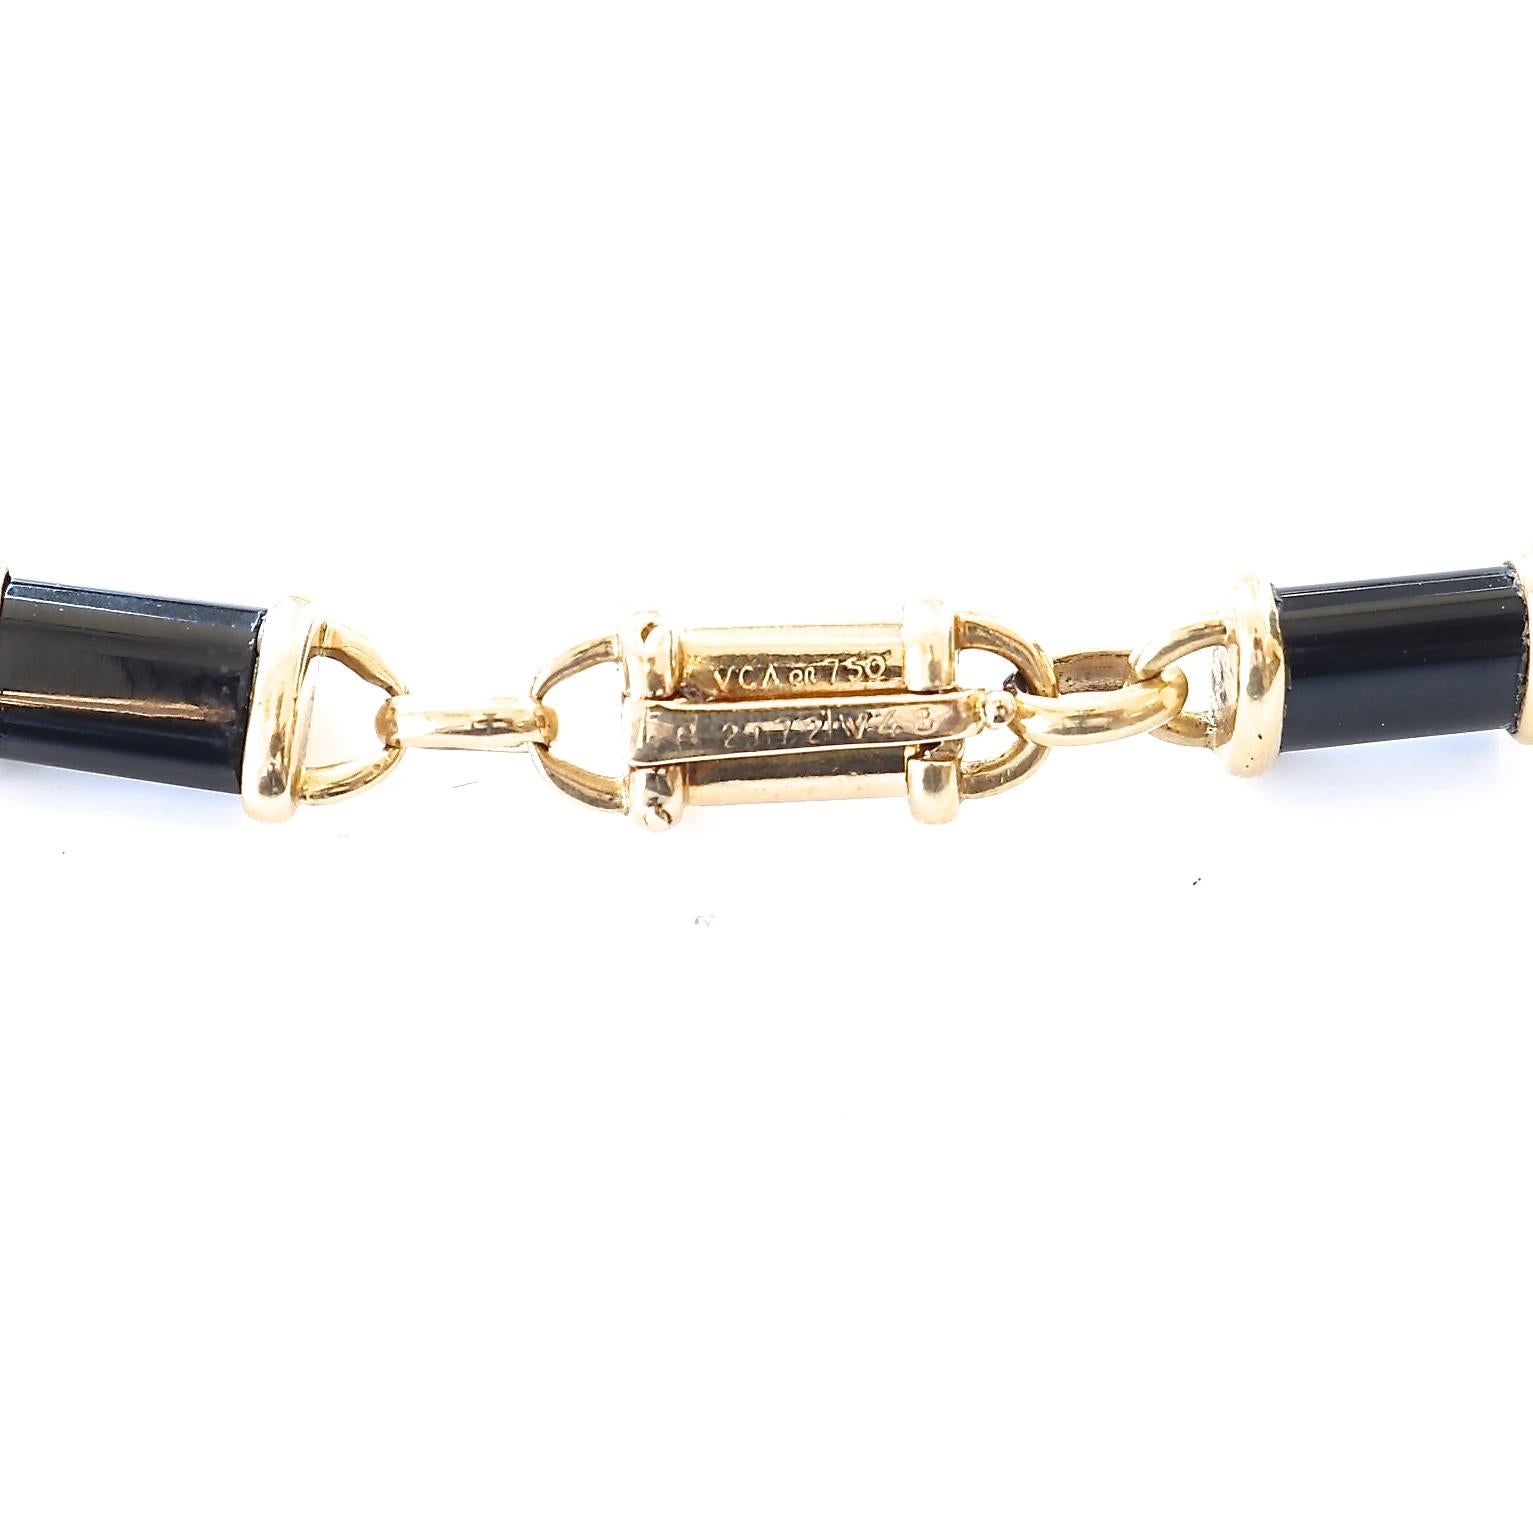  VCA has created a well thought out interchangeable necklace bracelet. Practical and oh so beautiful. Crafted in links of onyx and 18k gold that create two bracelets or just the necklace. Singed VCA, numbered and stamped with French hallmarks.